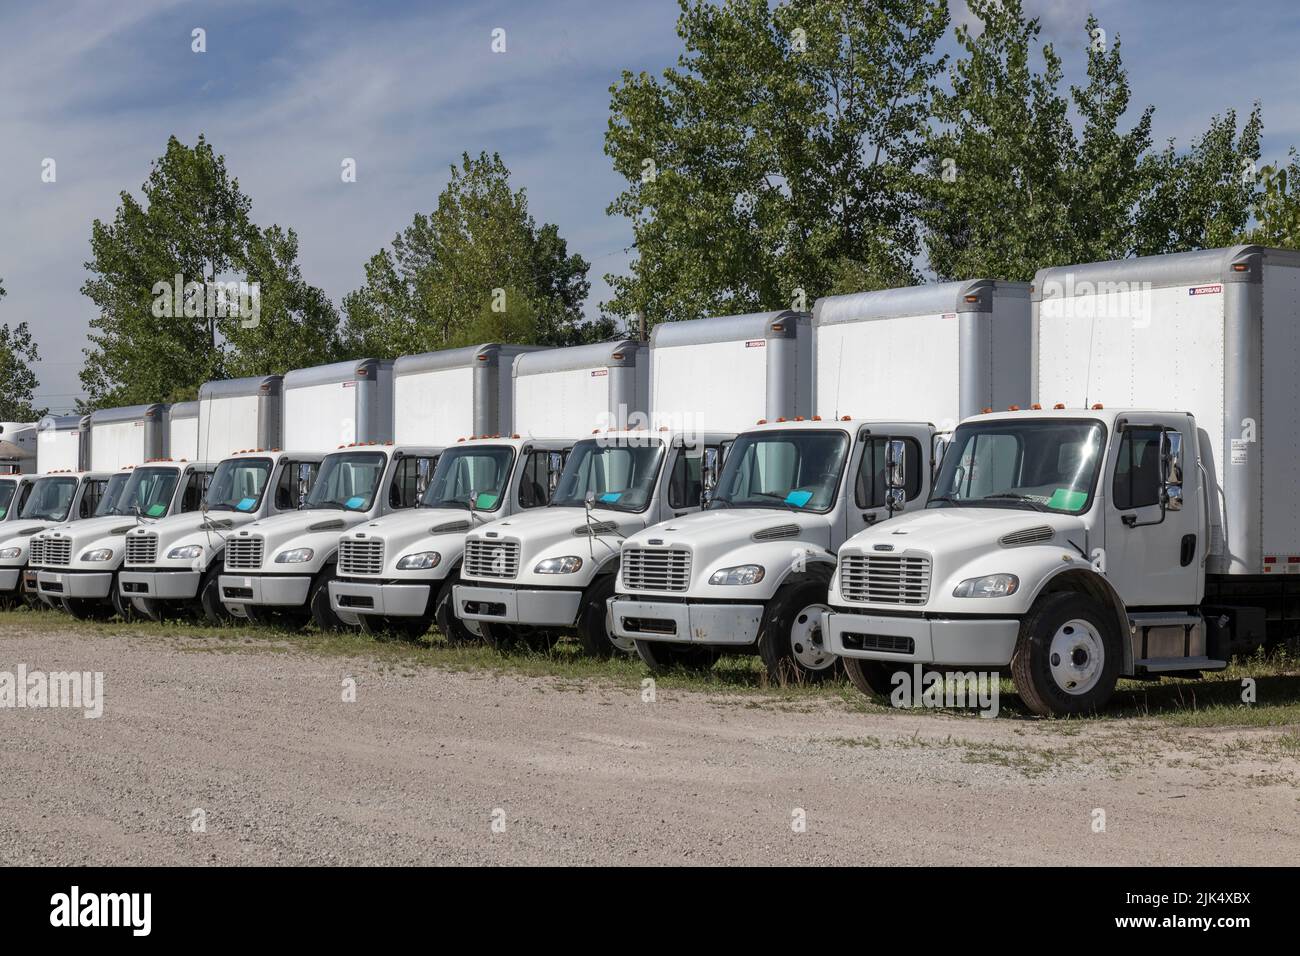 Indianapolis - Circa July 2022: Freightliner Semi Tractor Trailer Trucks Lined up for sale. Freightliner is owned by Daimler. Stock Photo